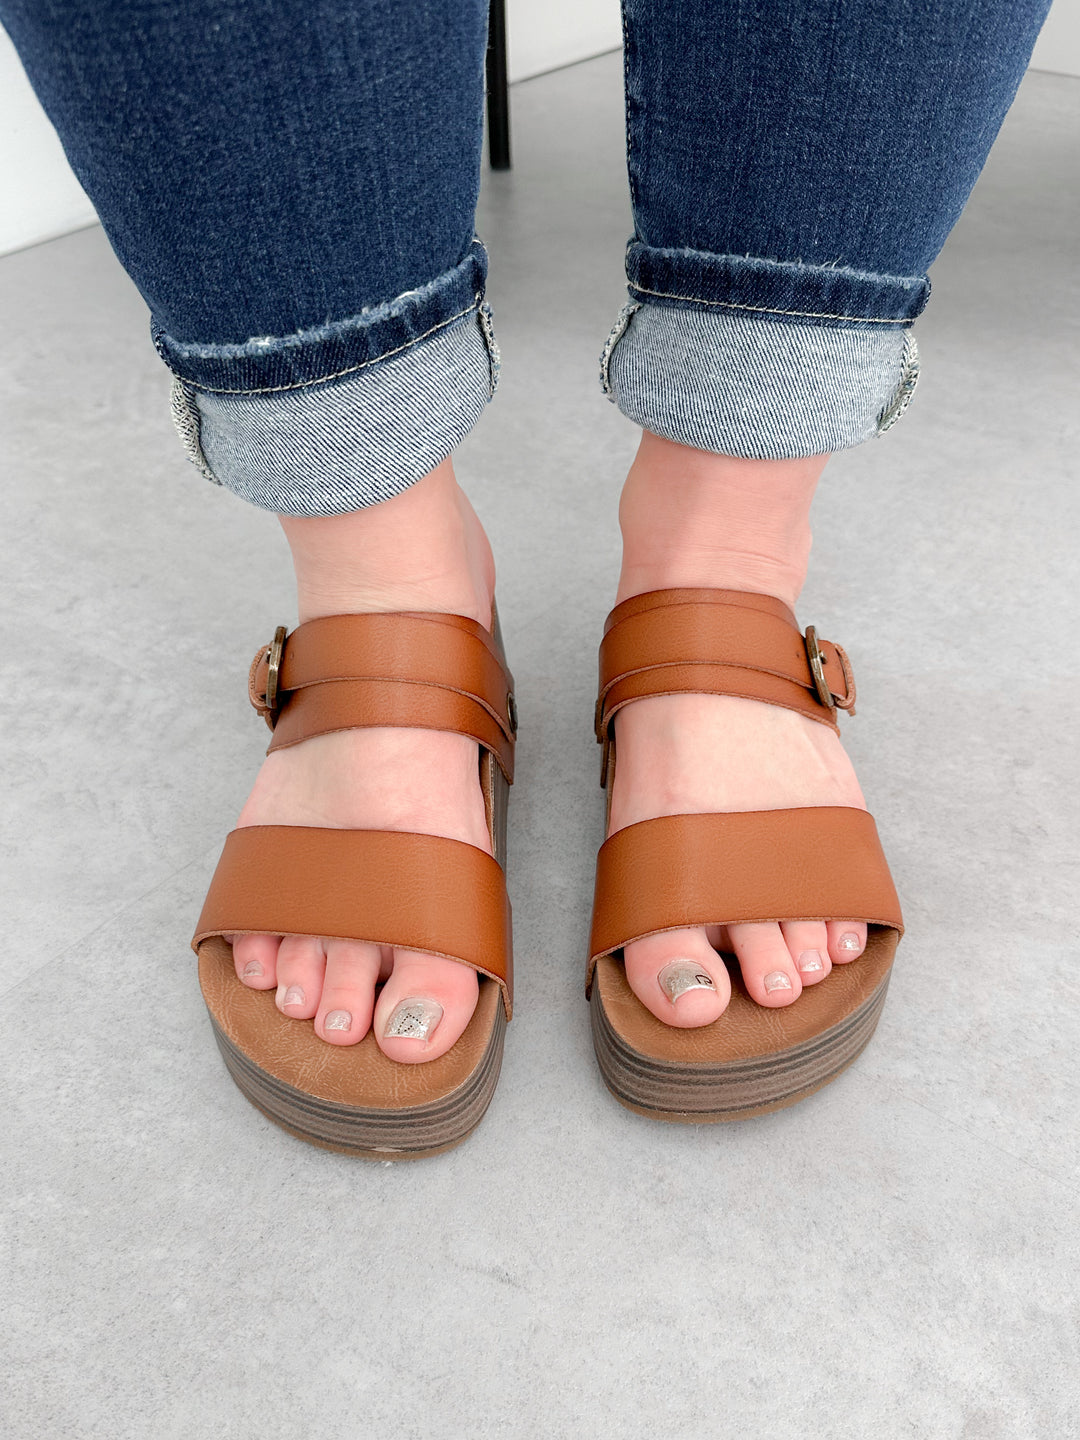 Marge Two Way Sandal in Wood by Blowfish